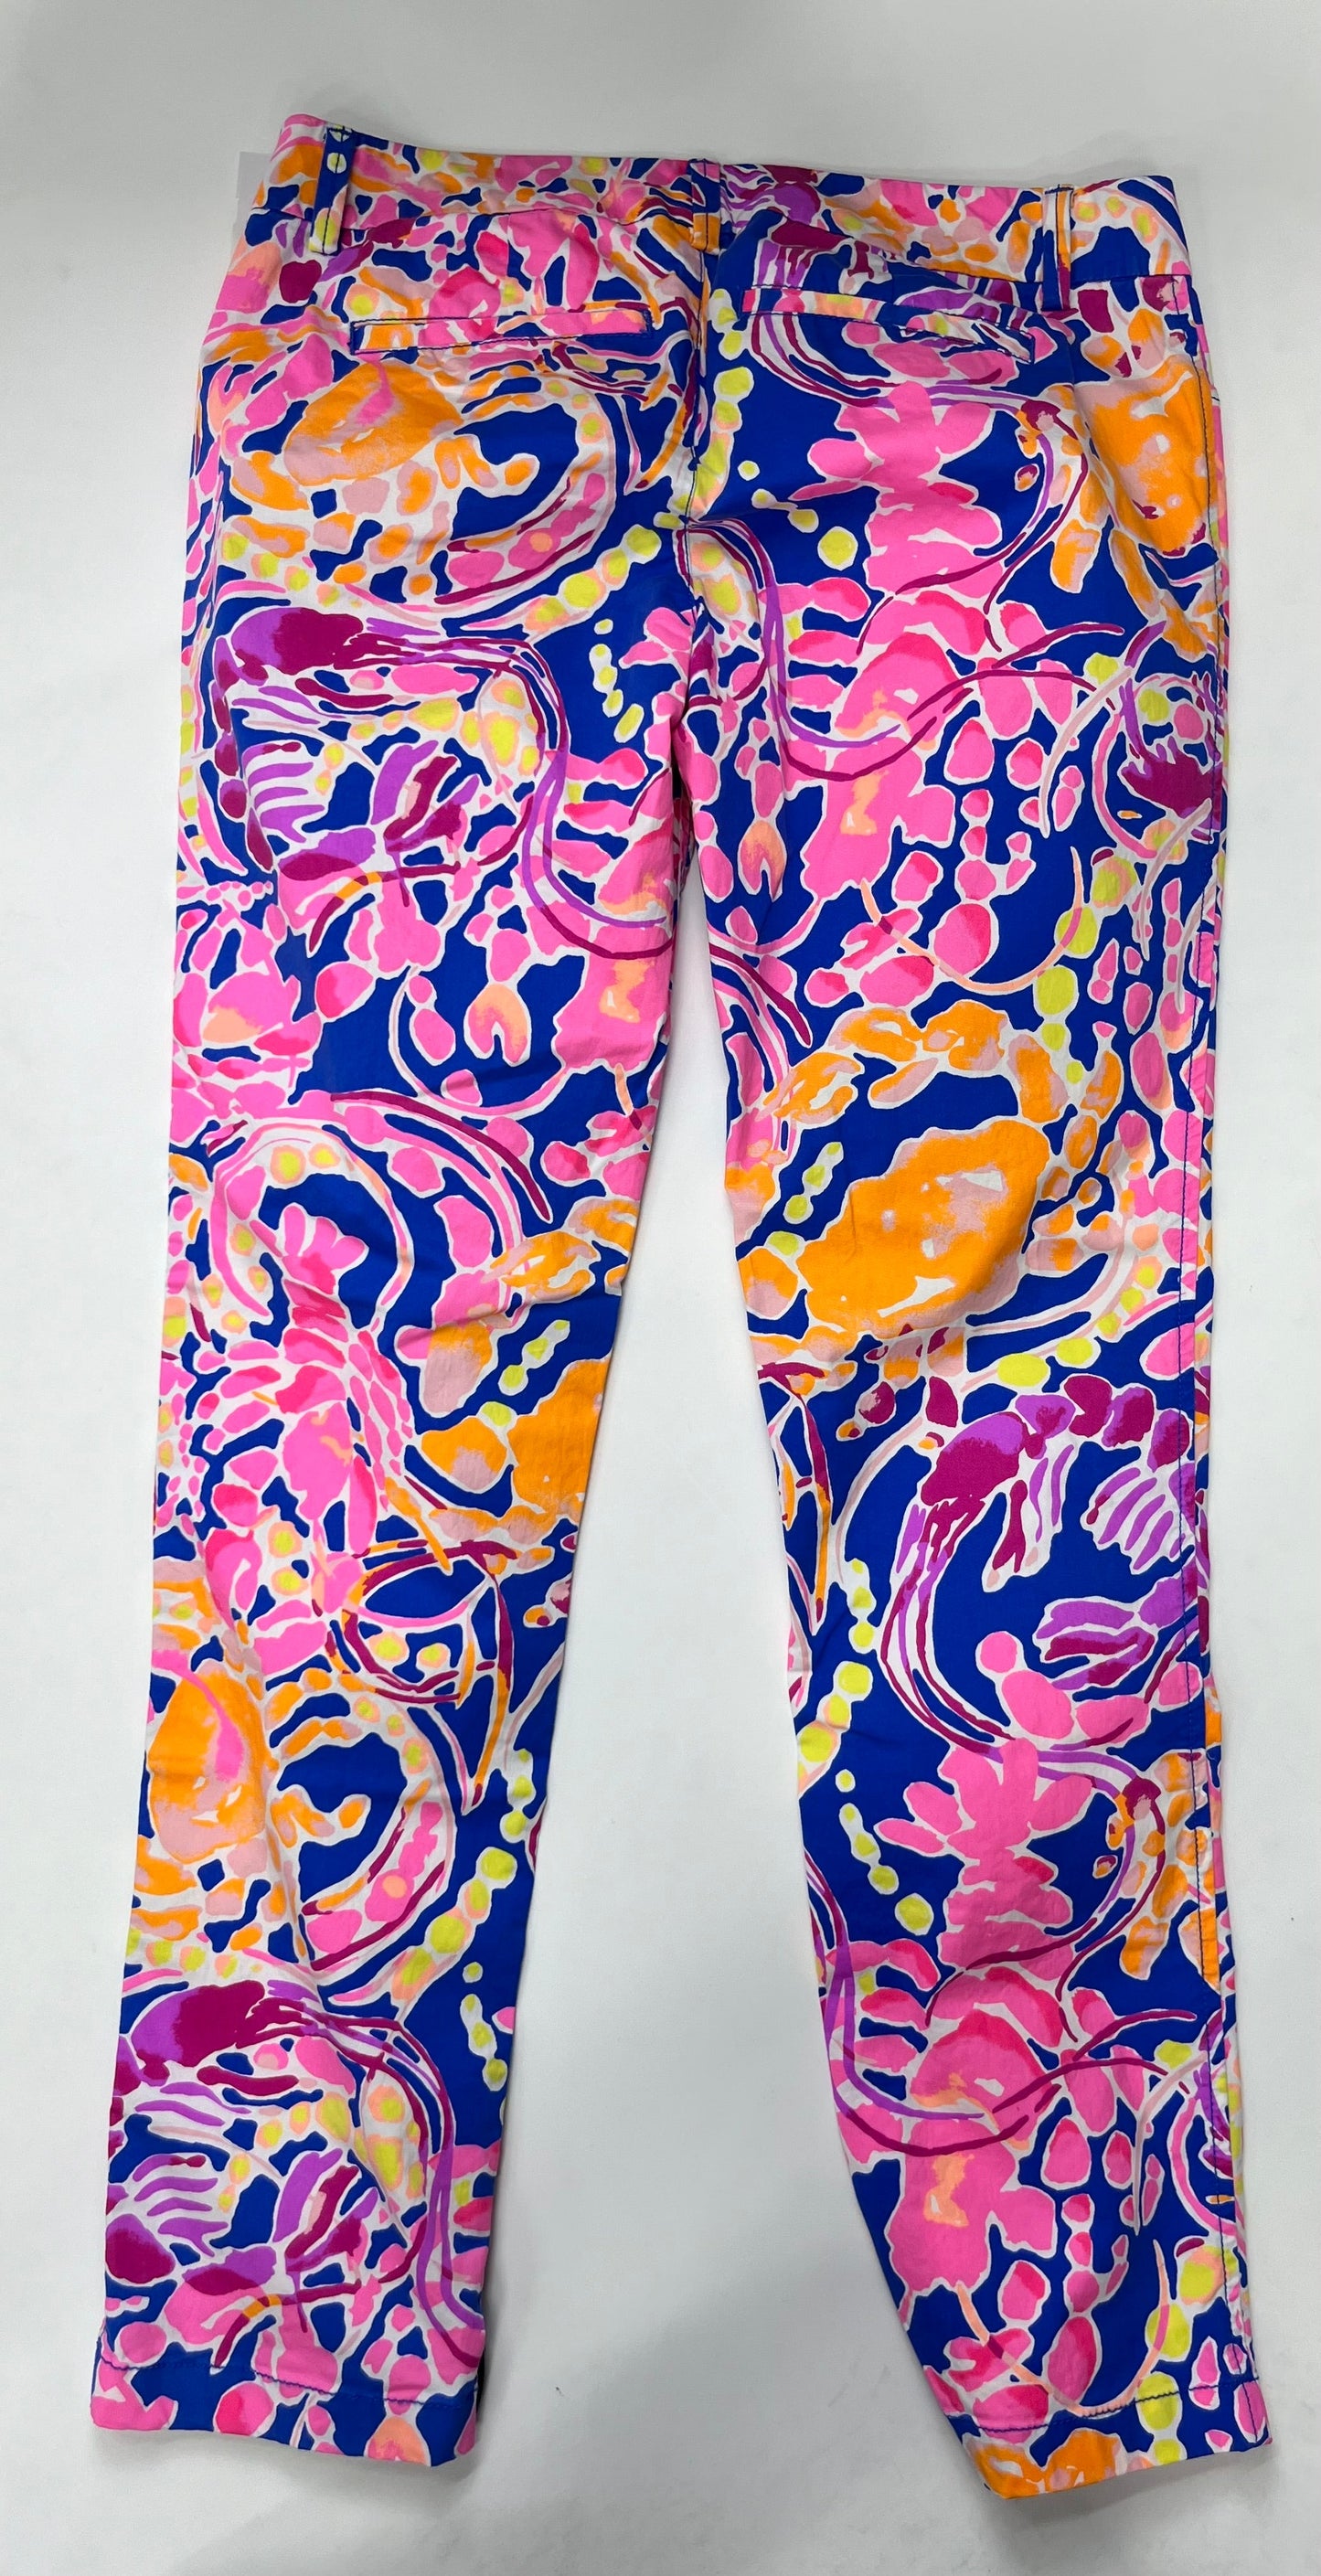 Pants Work/dress By Lilly Pulitzer  Size: 6